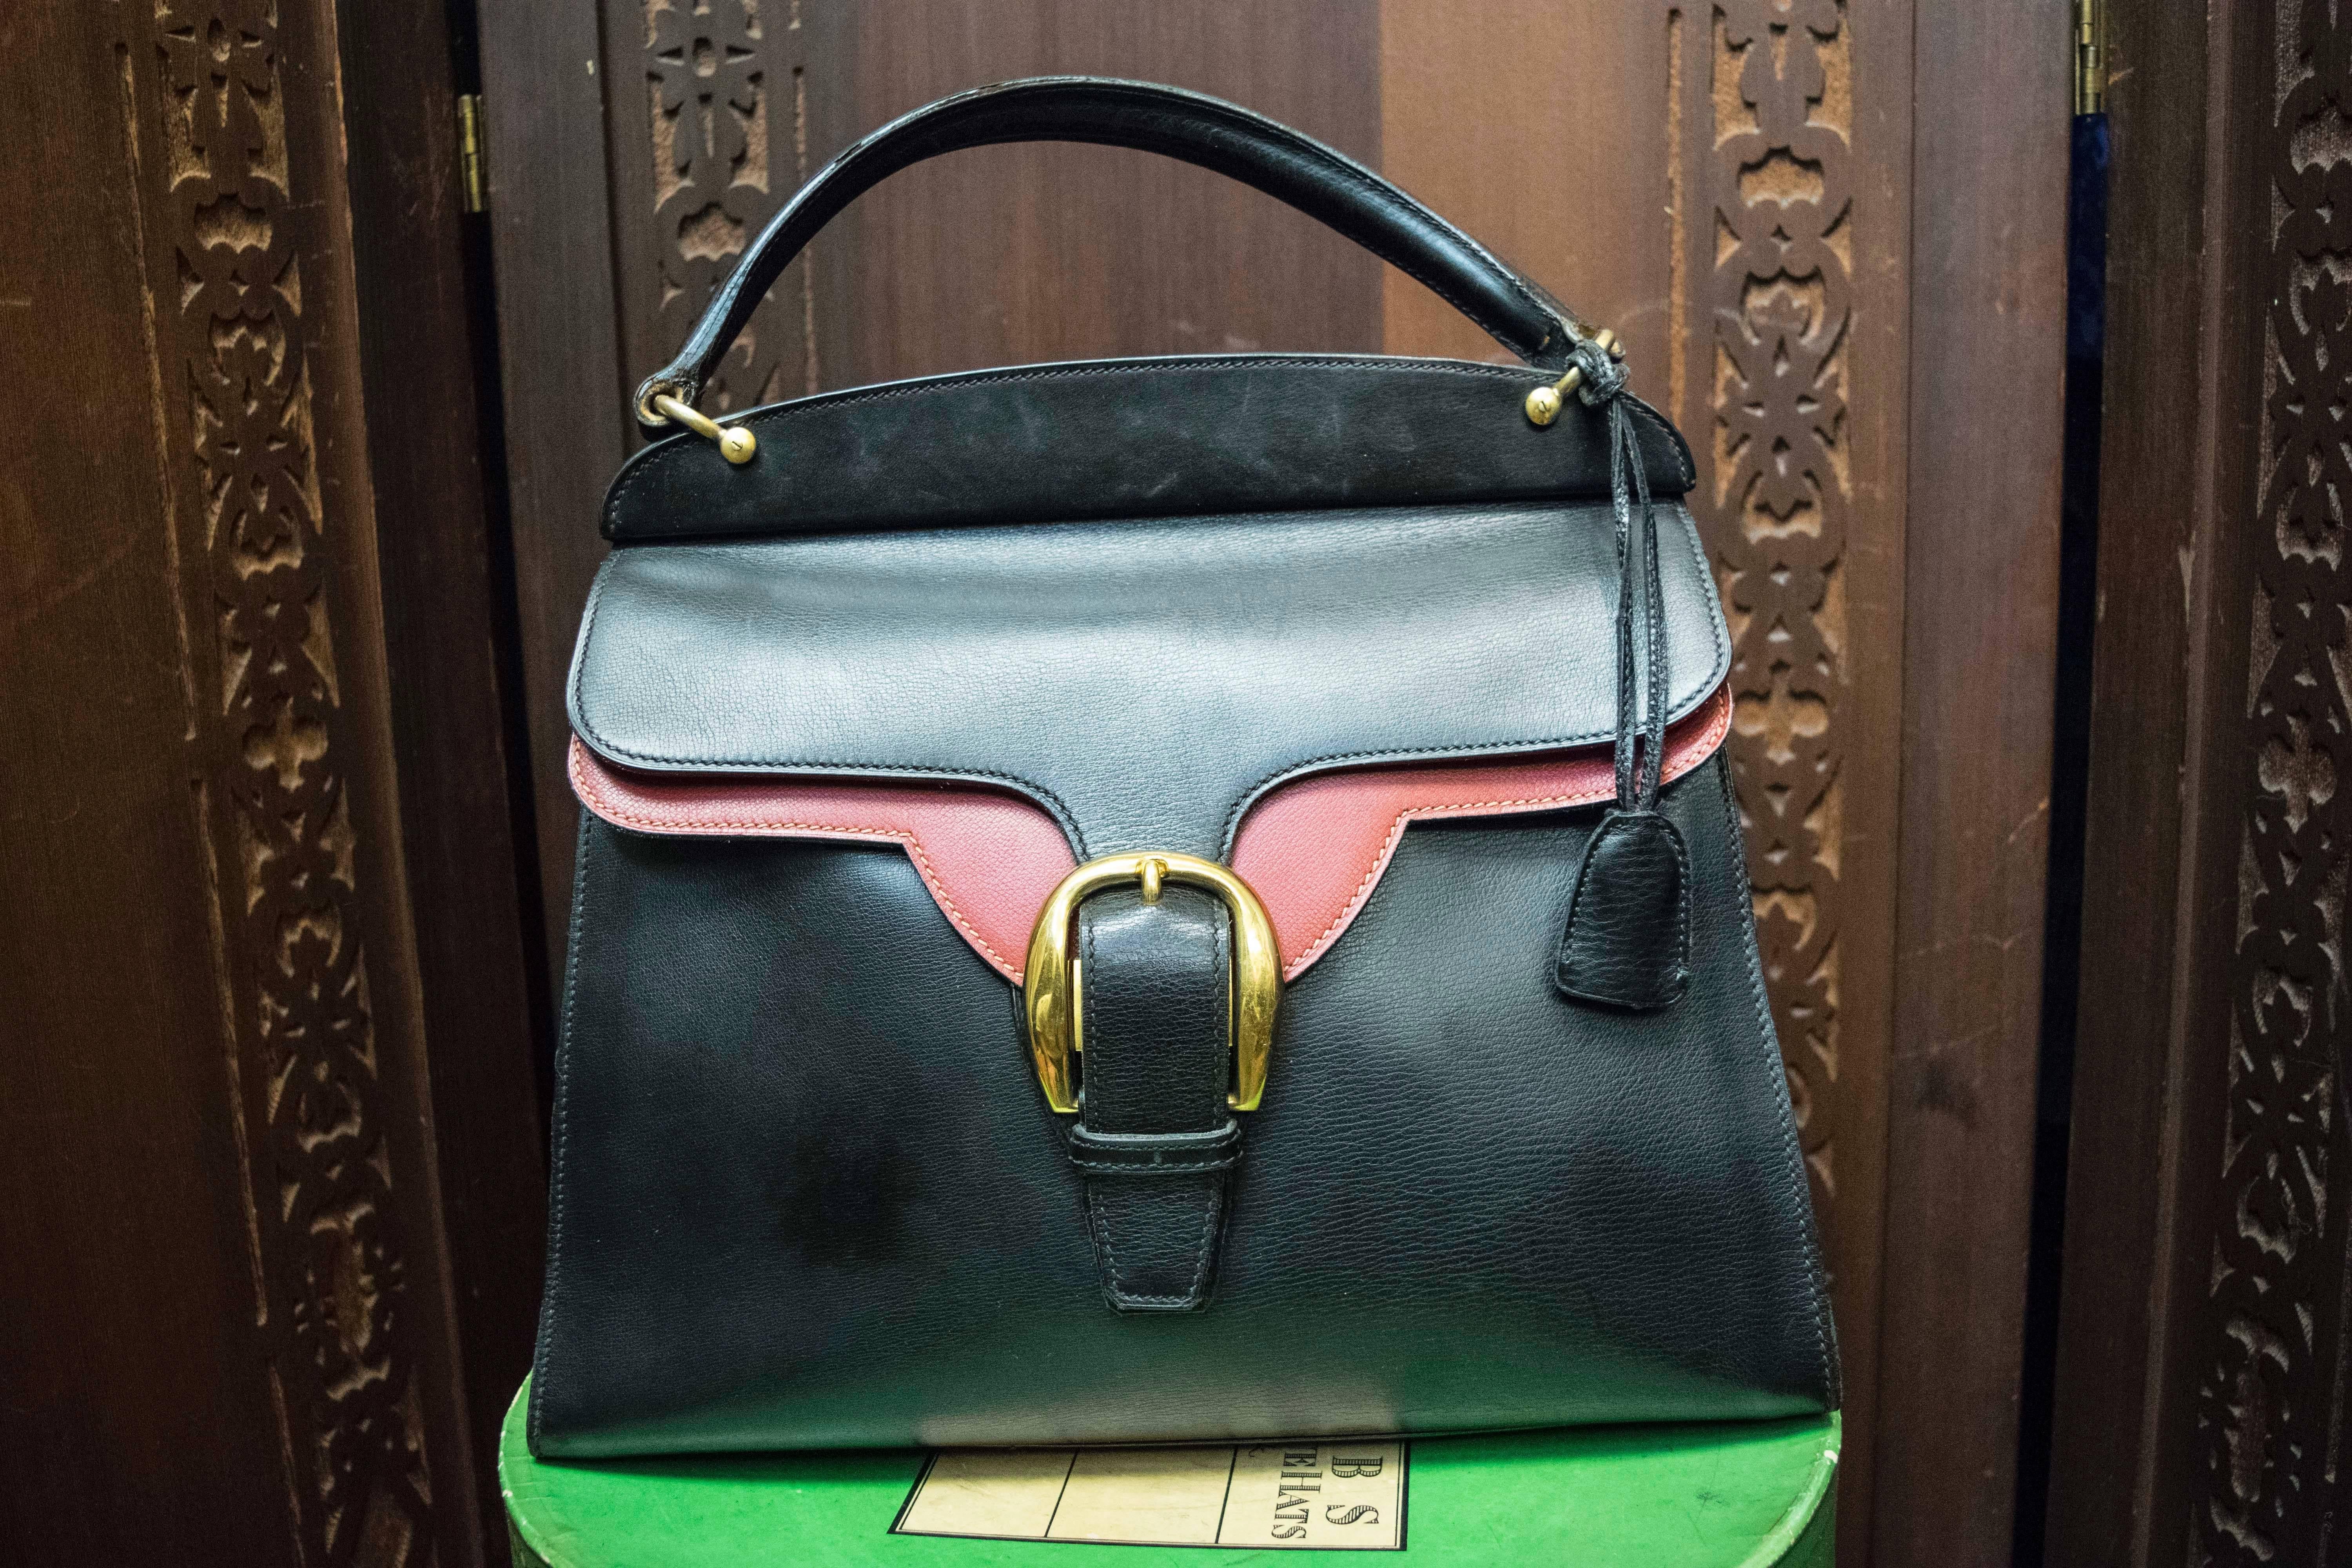 1950s Gucci Black and Red Leather Handbag 

Stunning Gucci handbag in excellent condition with the original key and lock. The leather is in near perfect condition and considering its age this is a truly rare find.  

L 14
H 11
D 5